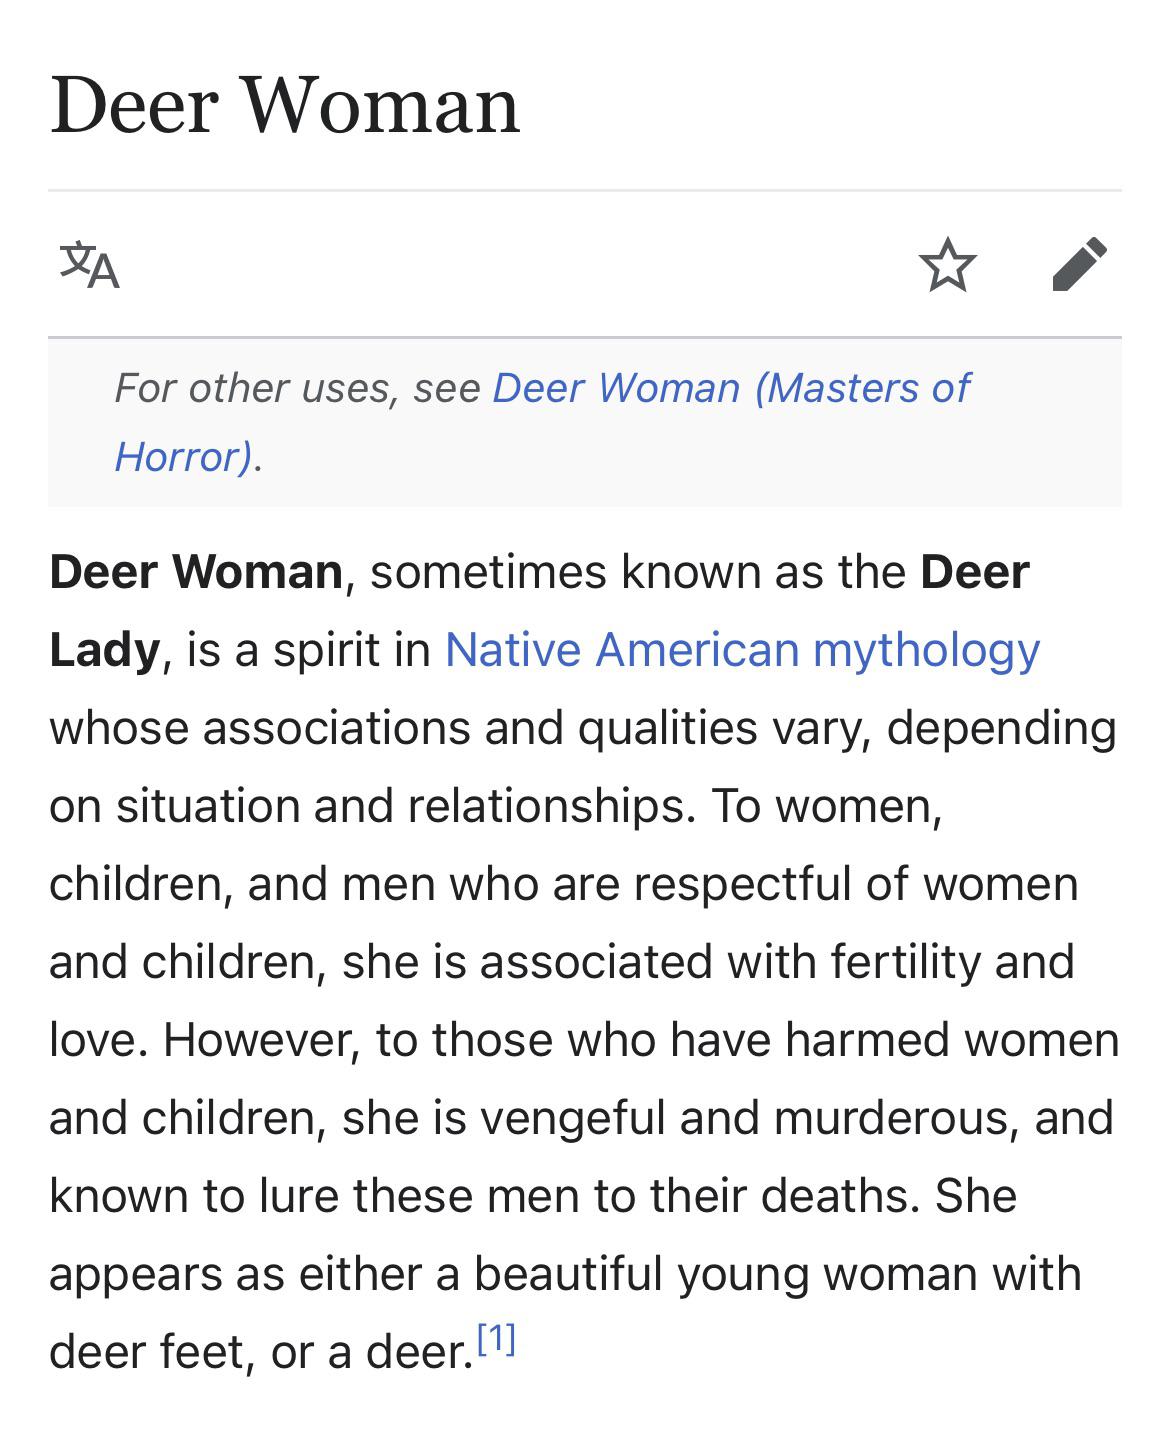 I just learned about the Deer Woman of Native American mythology. I’d like to nominate her and Julia Louis Dreyfus for the next presidential ticket.